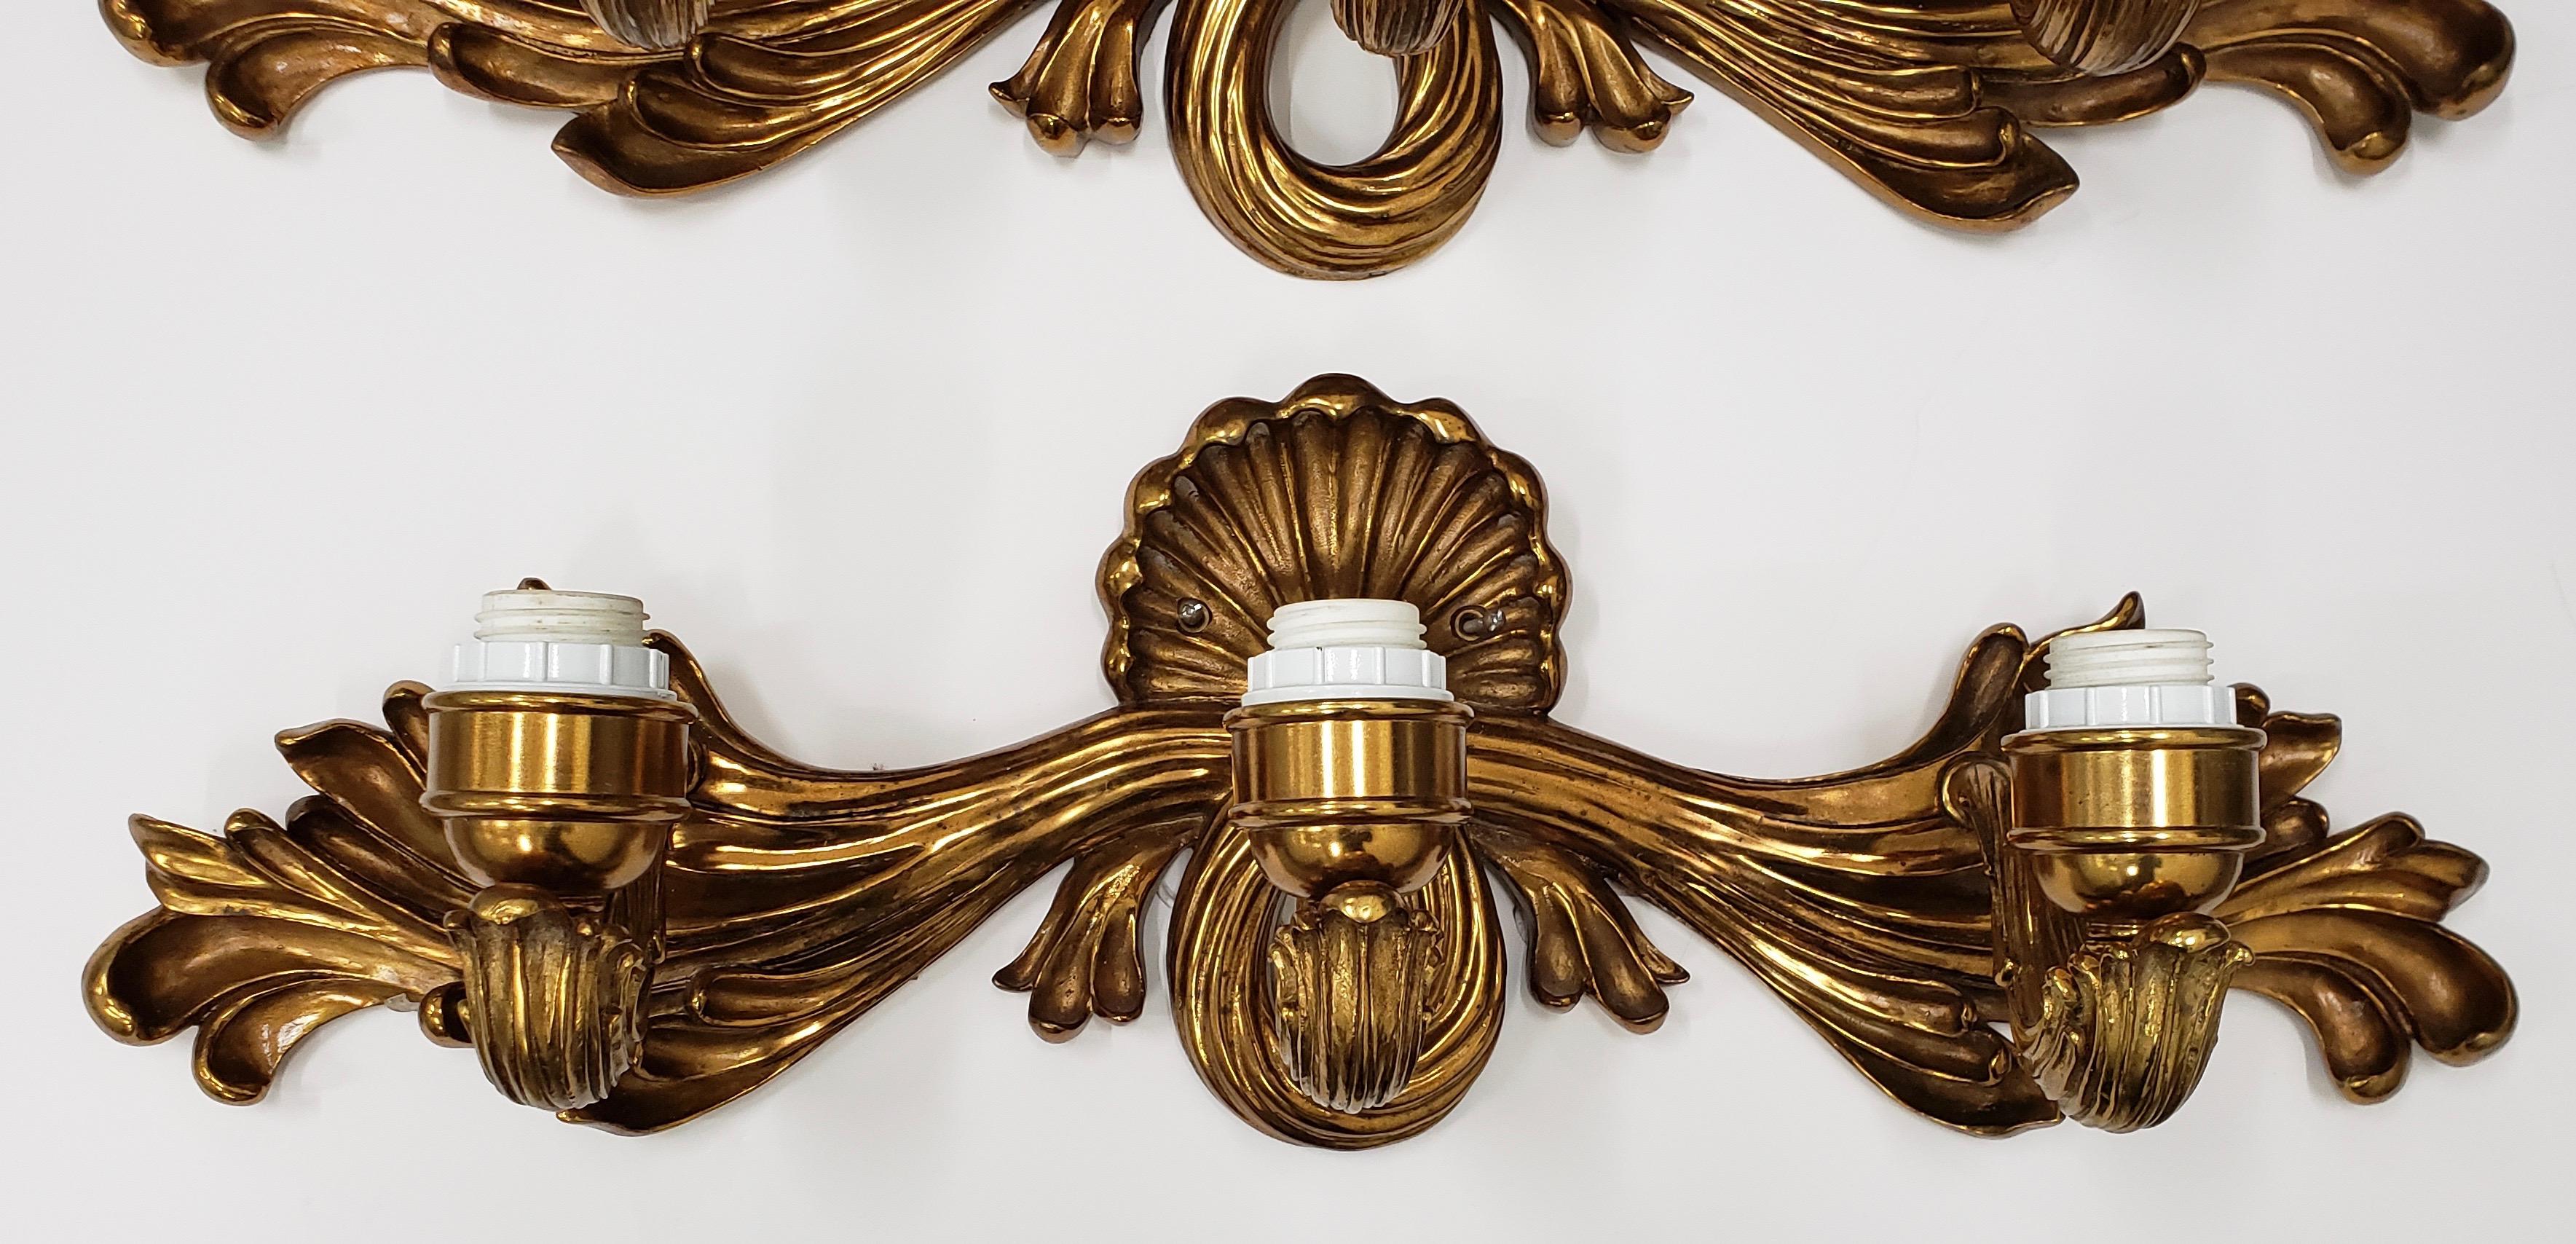 Pair of contemporary cast bronze and gilded wall sconces

Elegant pair of heavy bronze wall sconces. These are wired and ready to illuminate. No shades. No bulbs.

Each sconce measures 28 wide x 7